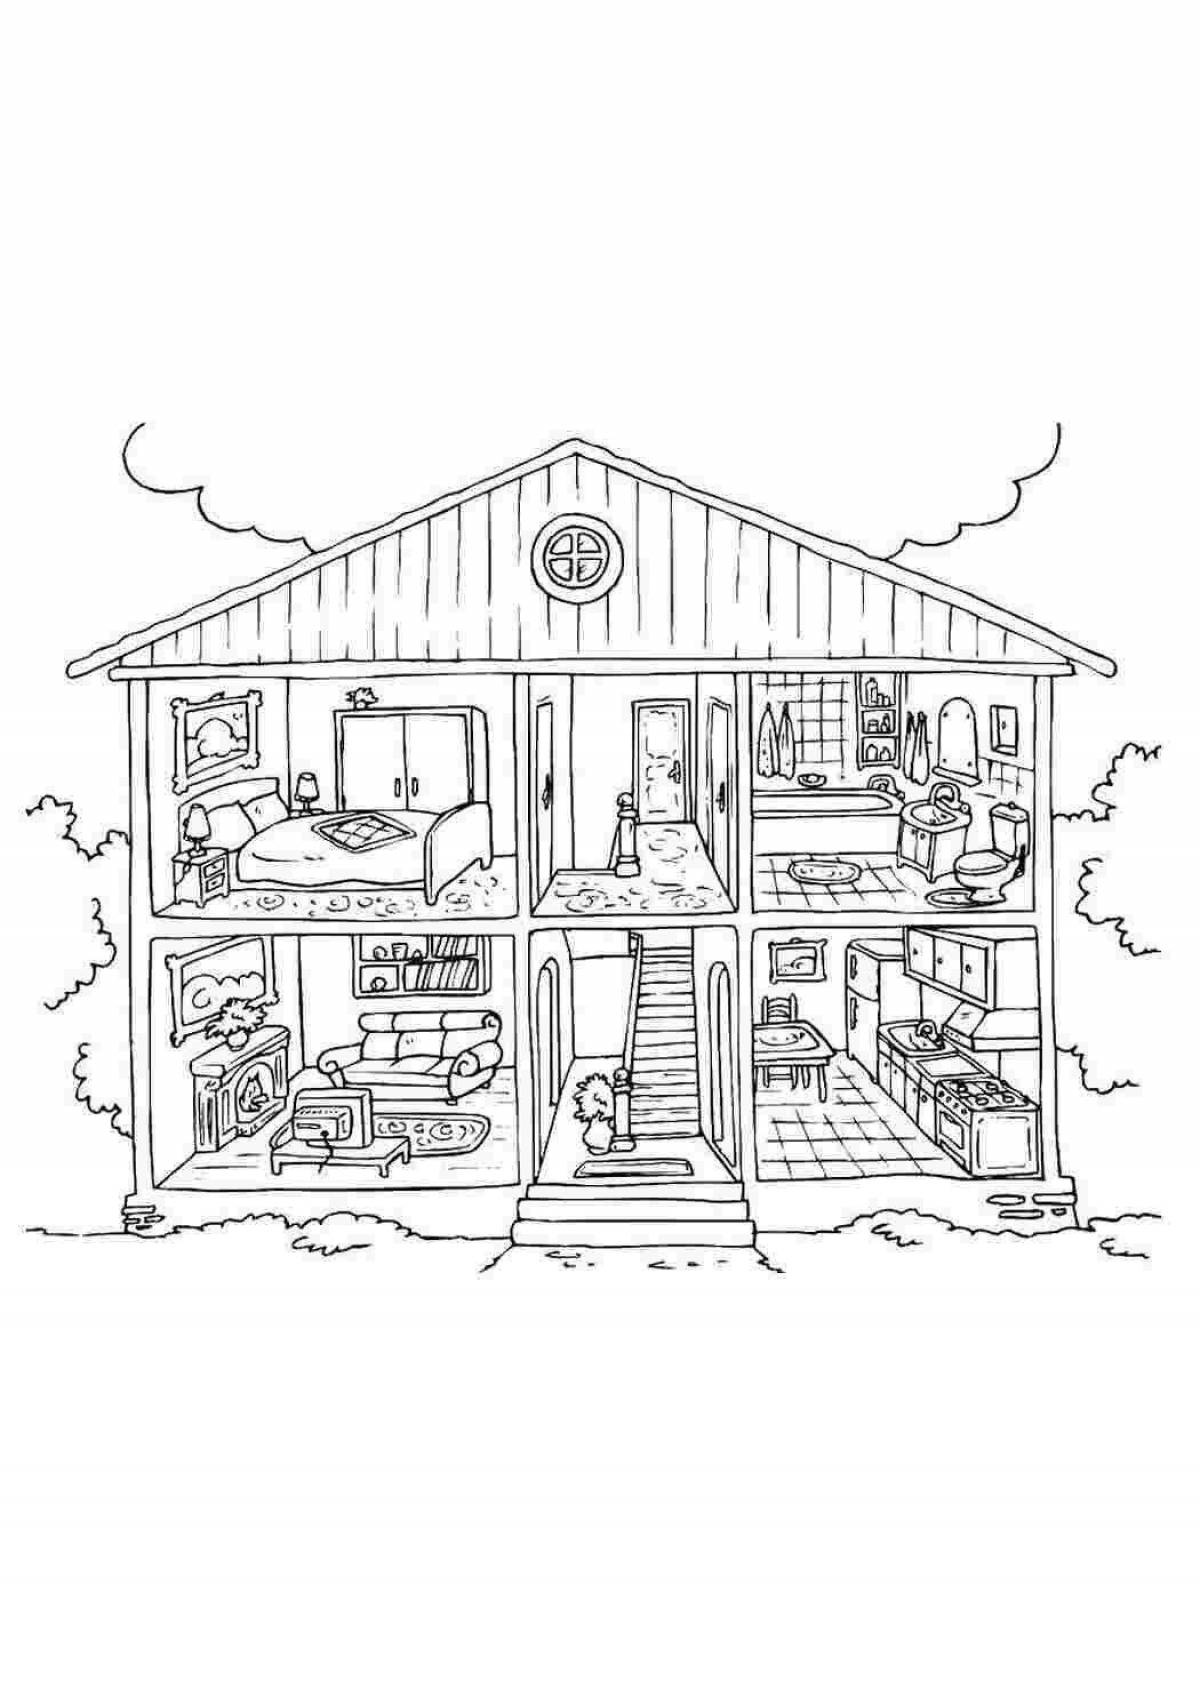 Exquisite doll house coloring book